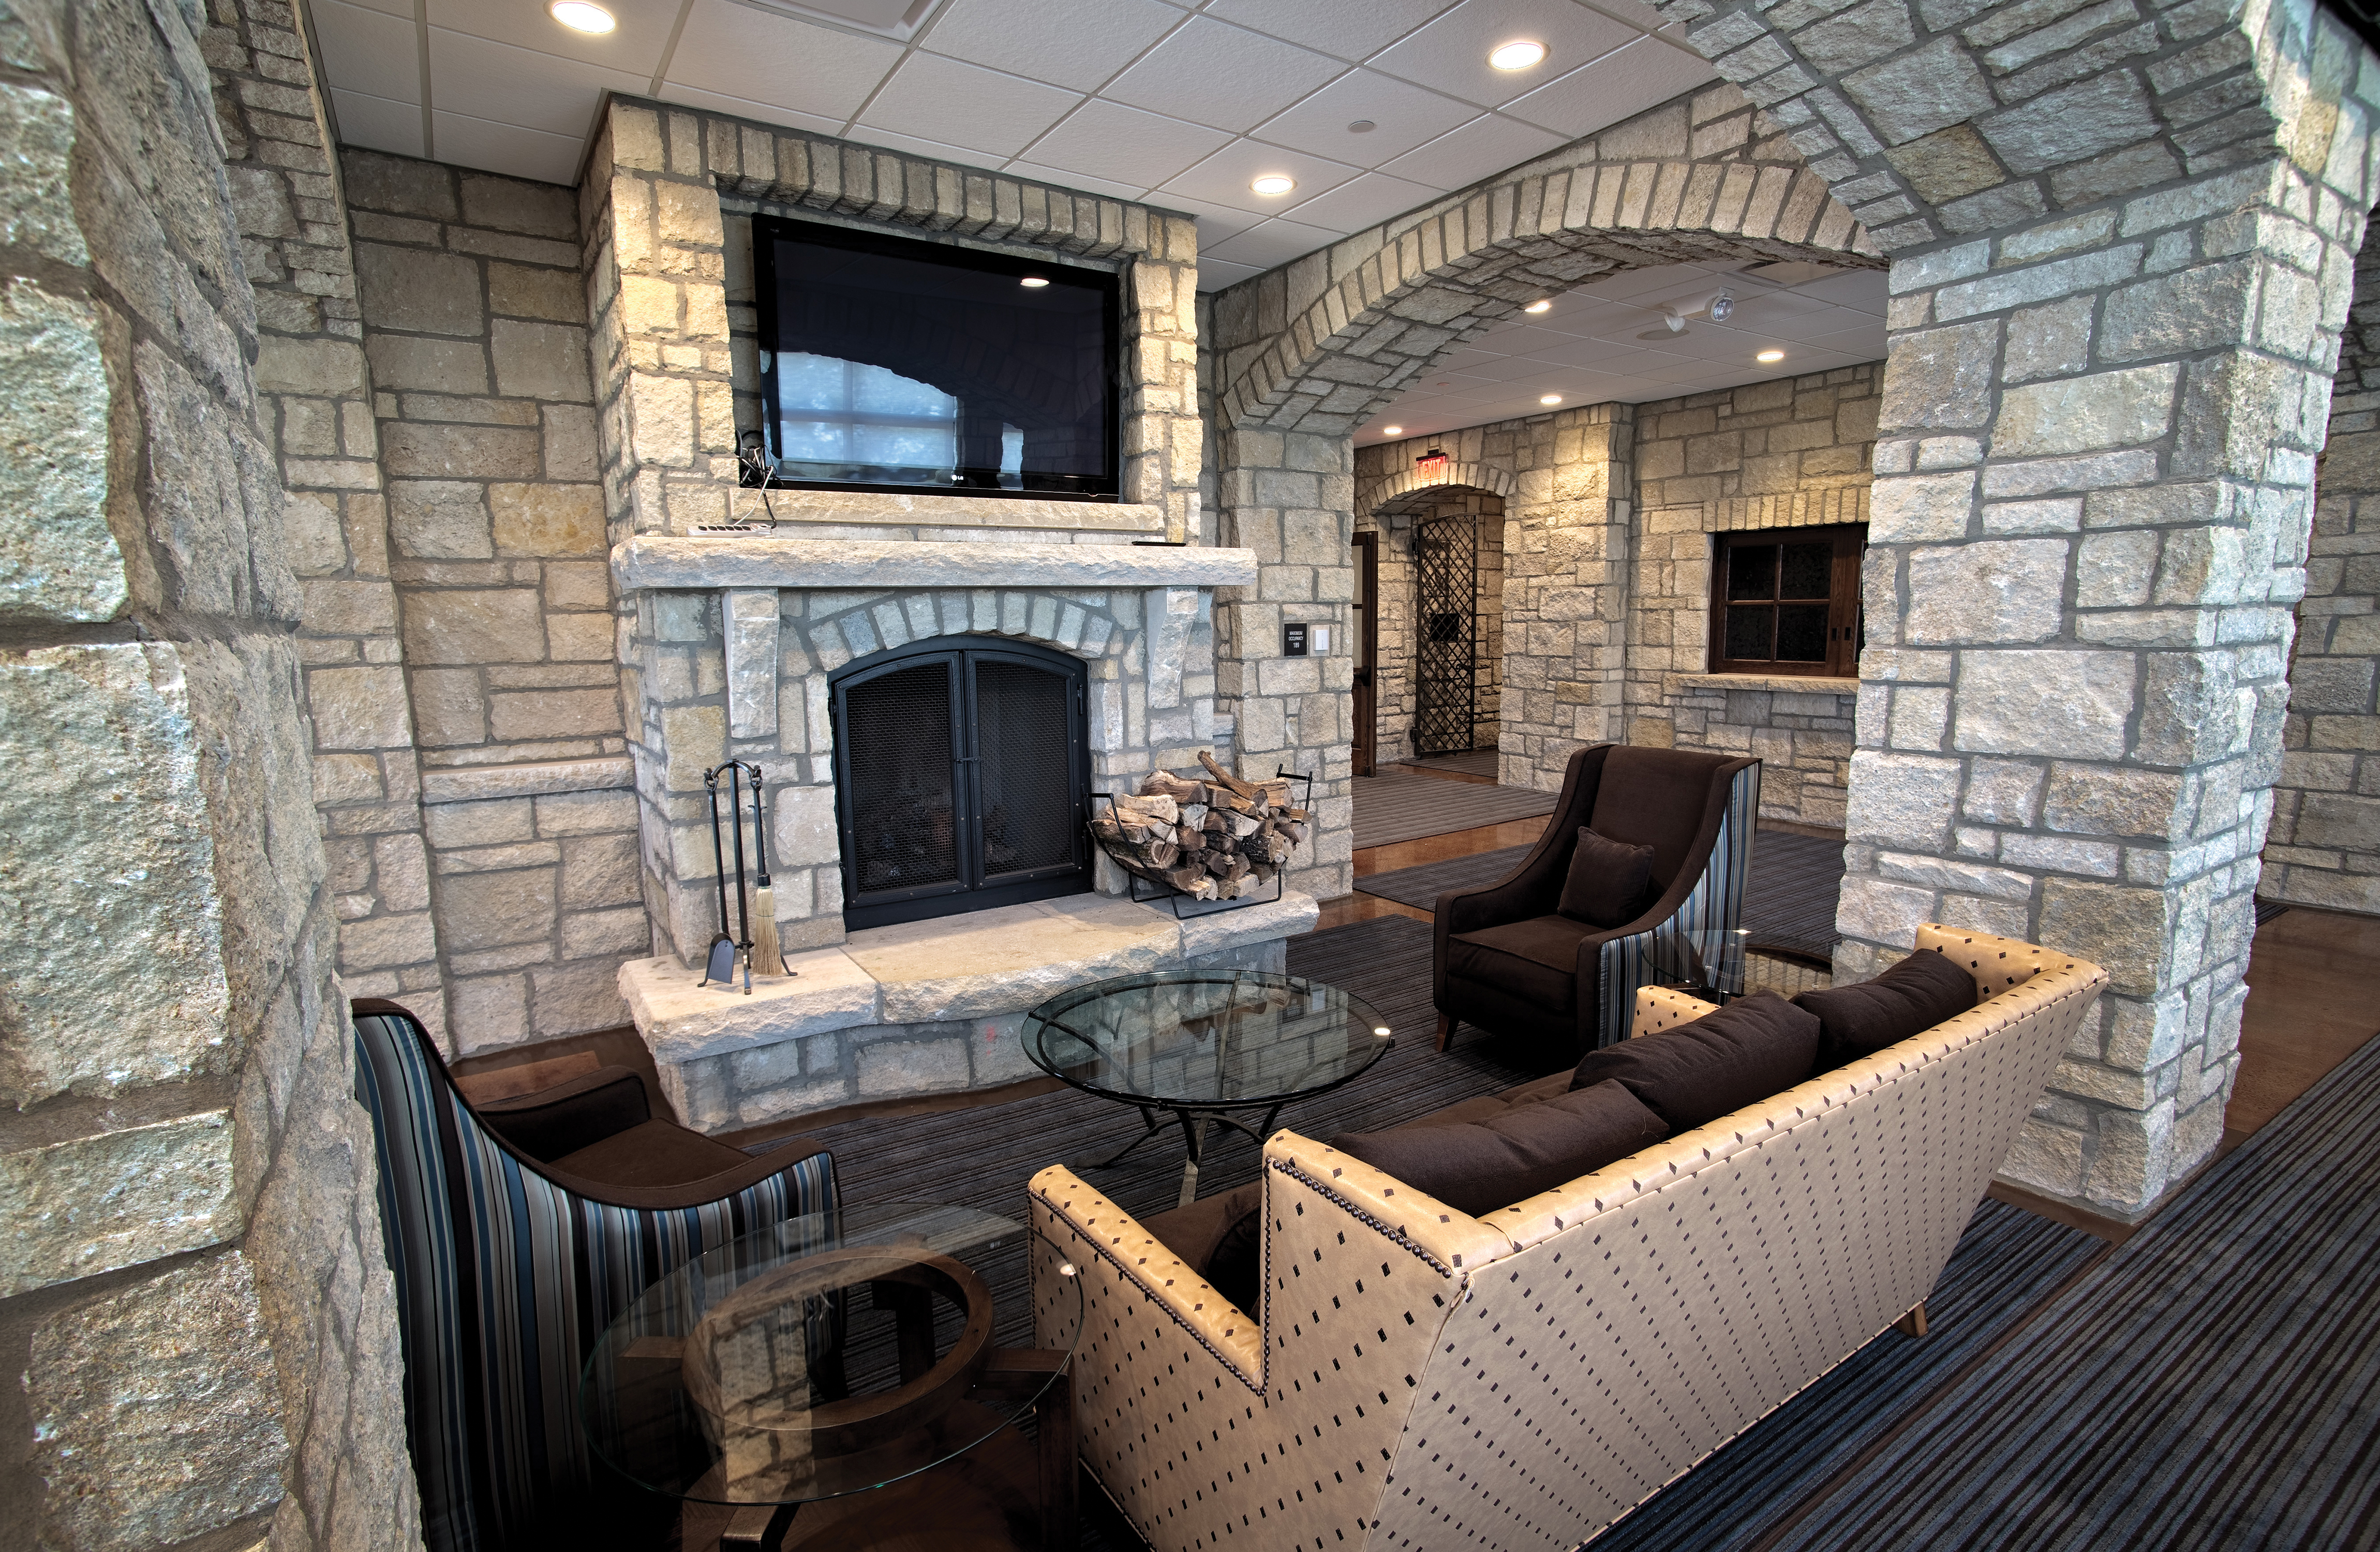 Lobby seating with fireplace and wall mounted TV